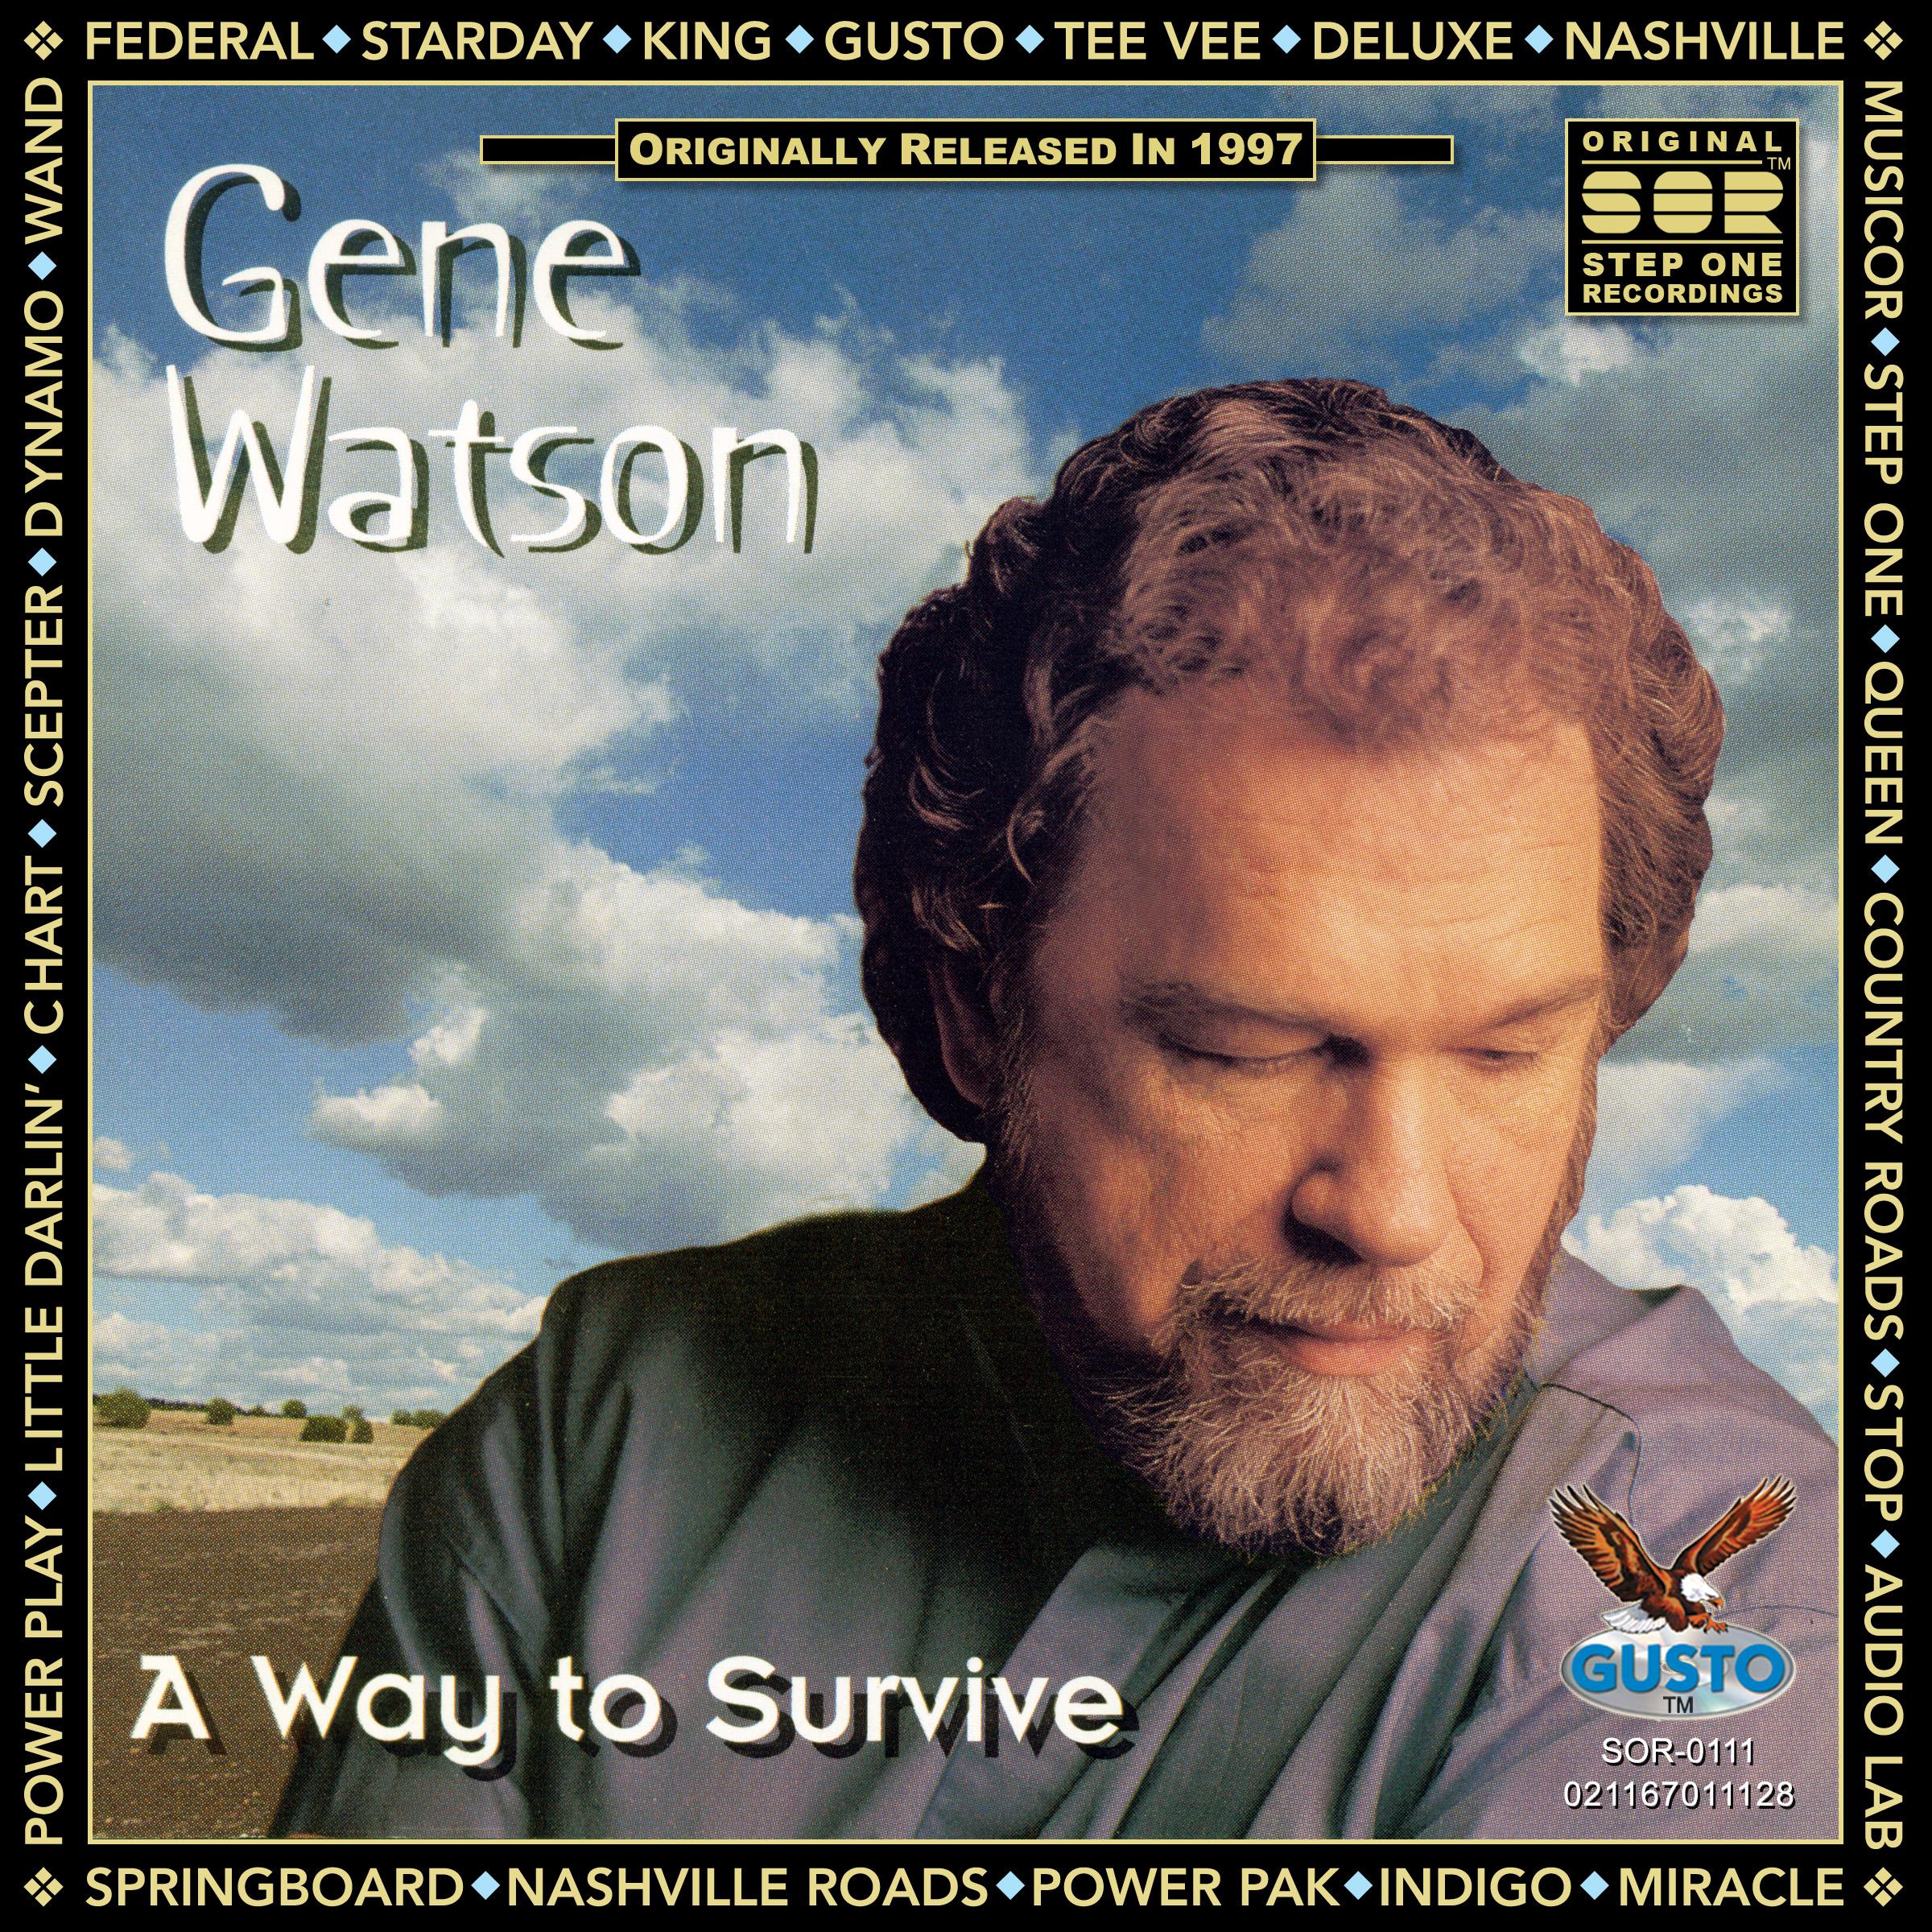 Gene Watson - Couldn't Love Have Picked A Better Place To Die (Original Step One Records Recording)